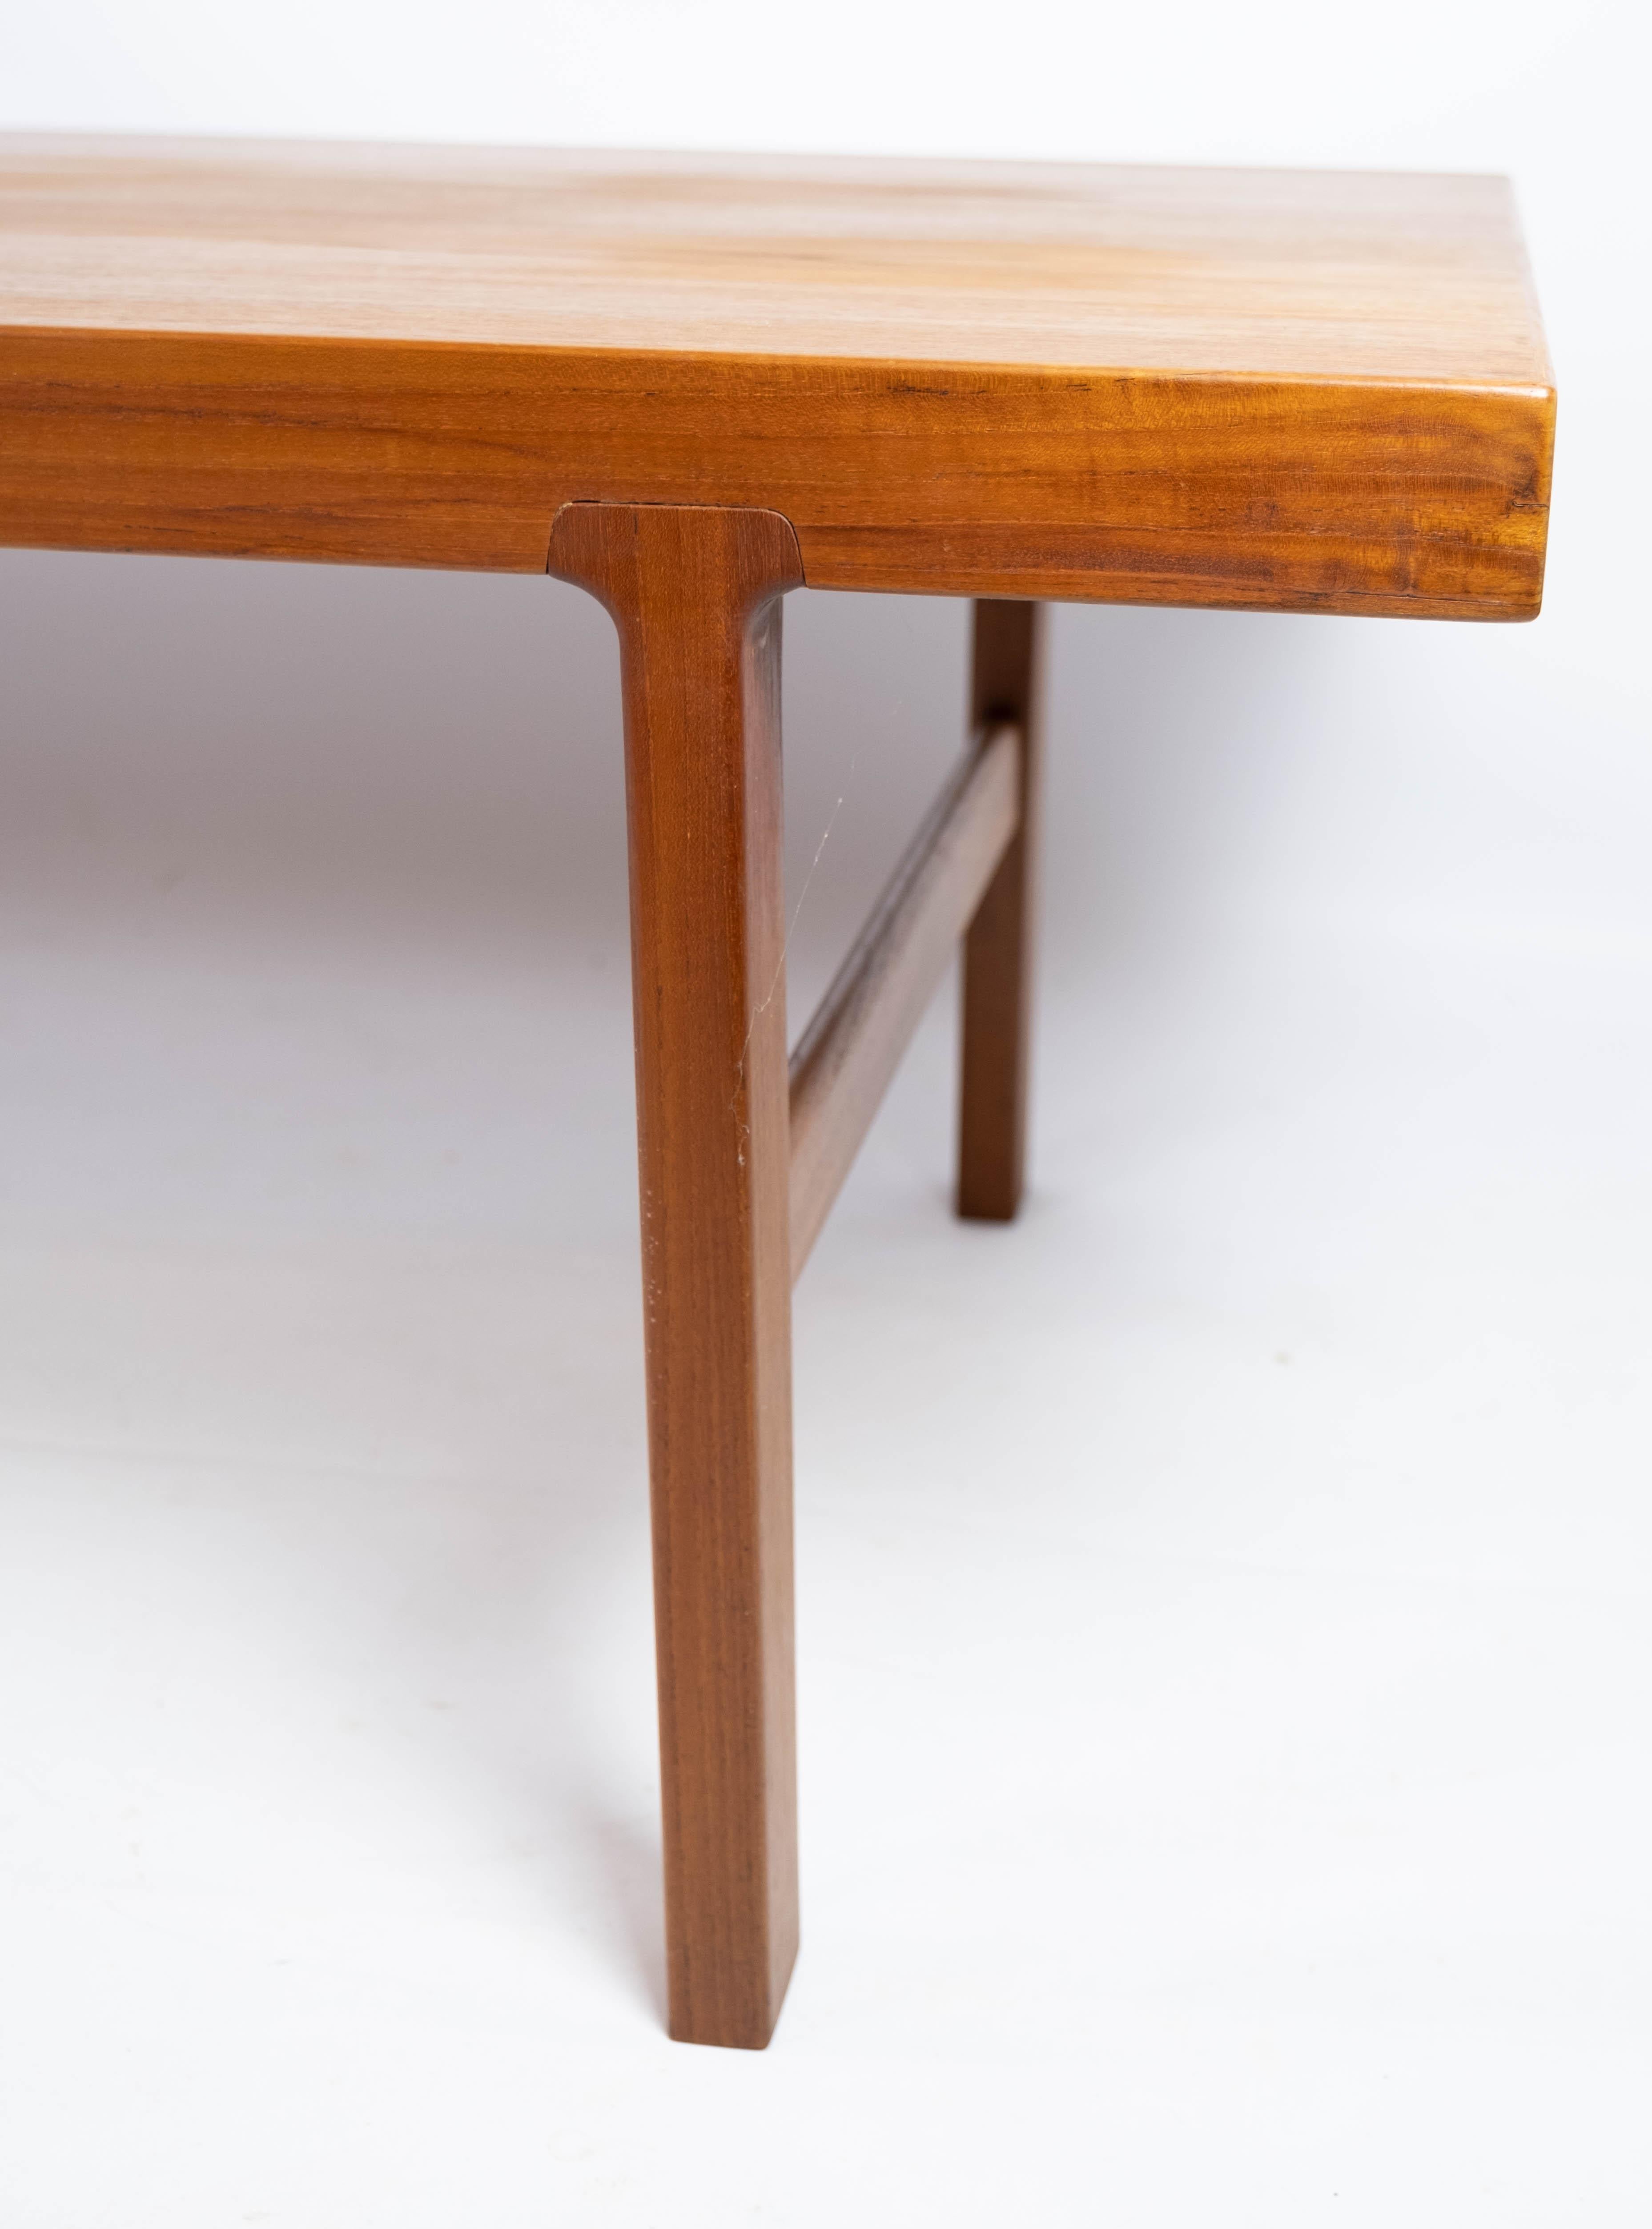 Scandinavian Modern Coffee Table in Teak with Extension Plate of Danish Design from the 1960s